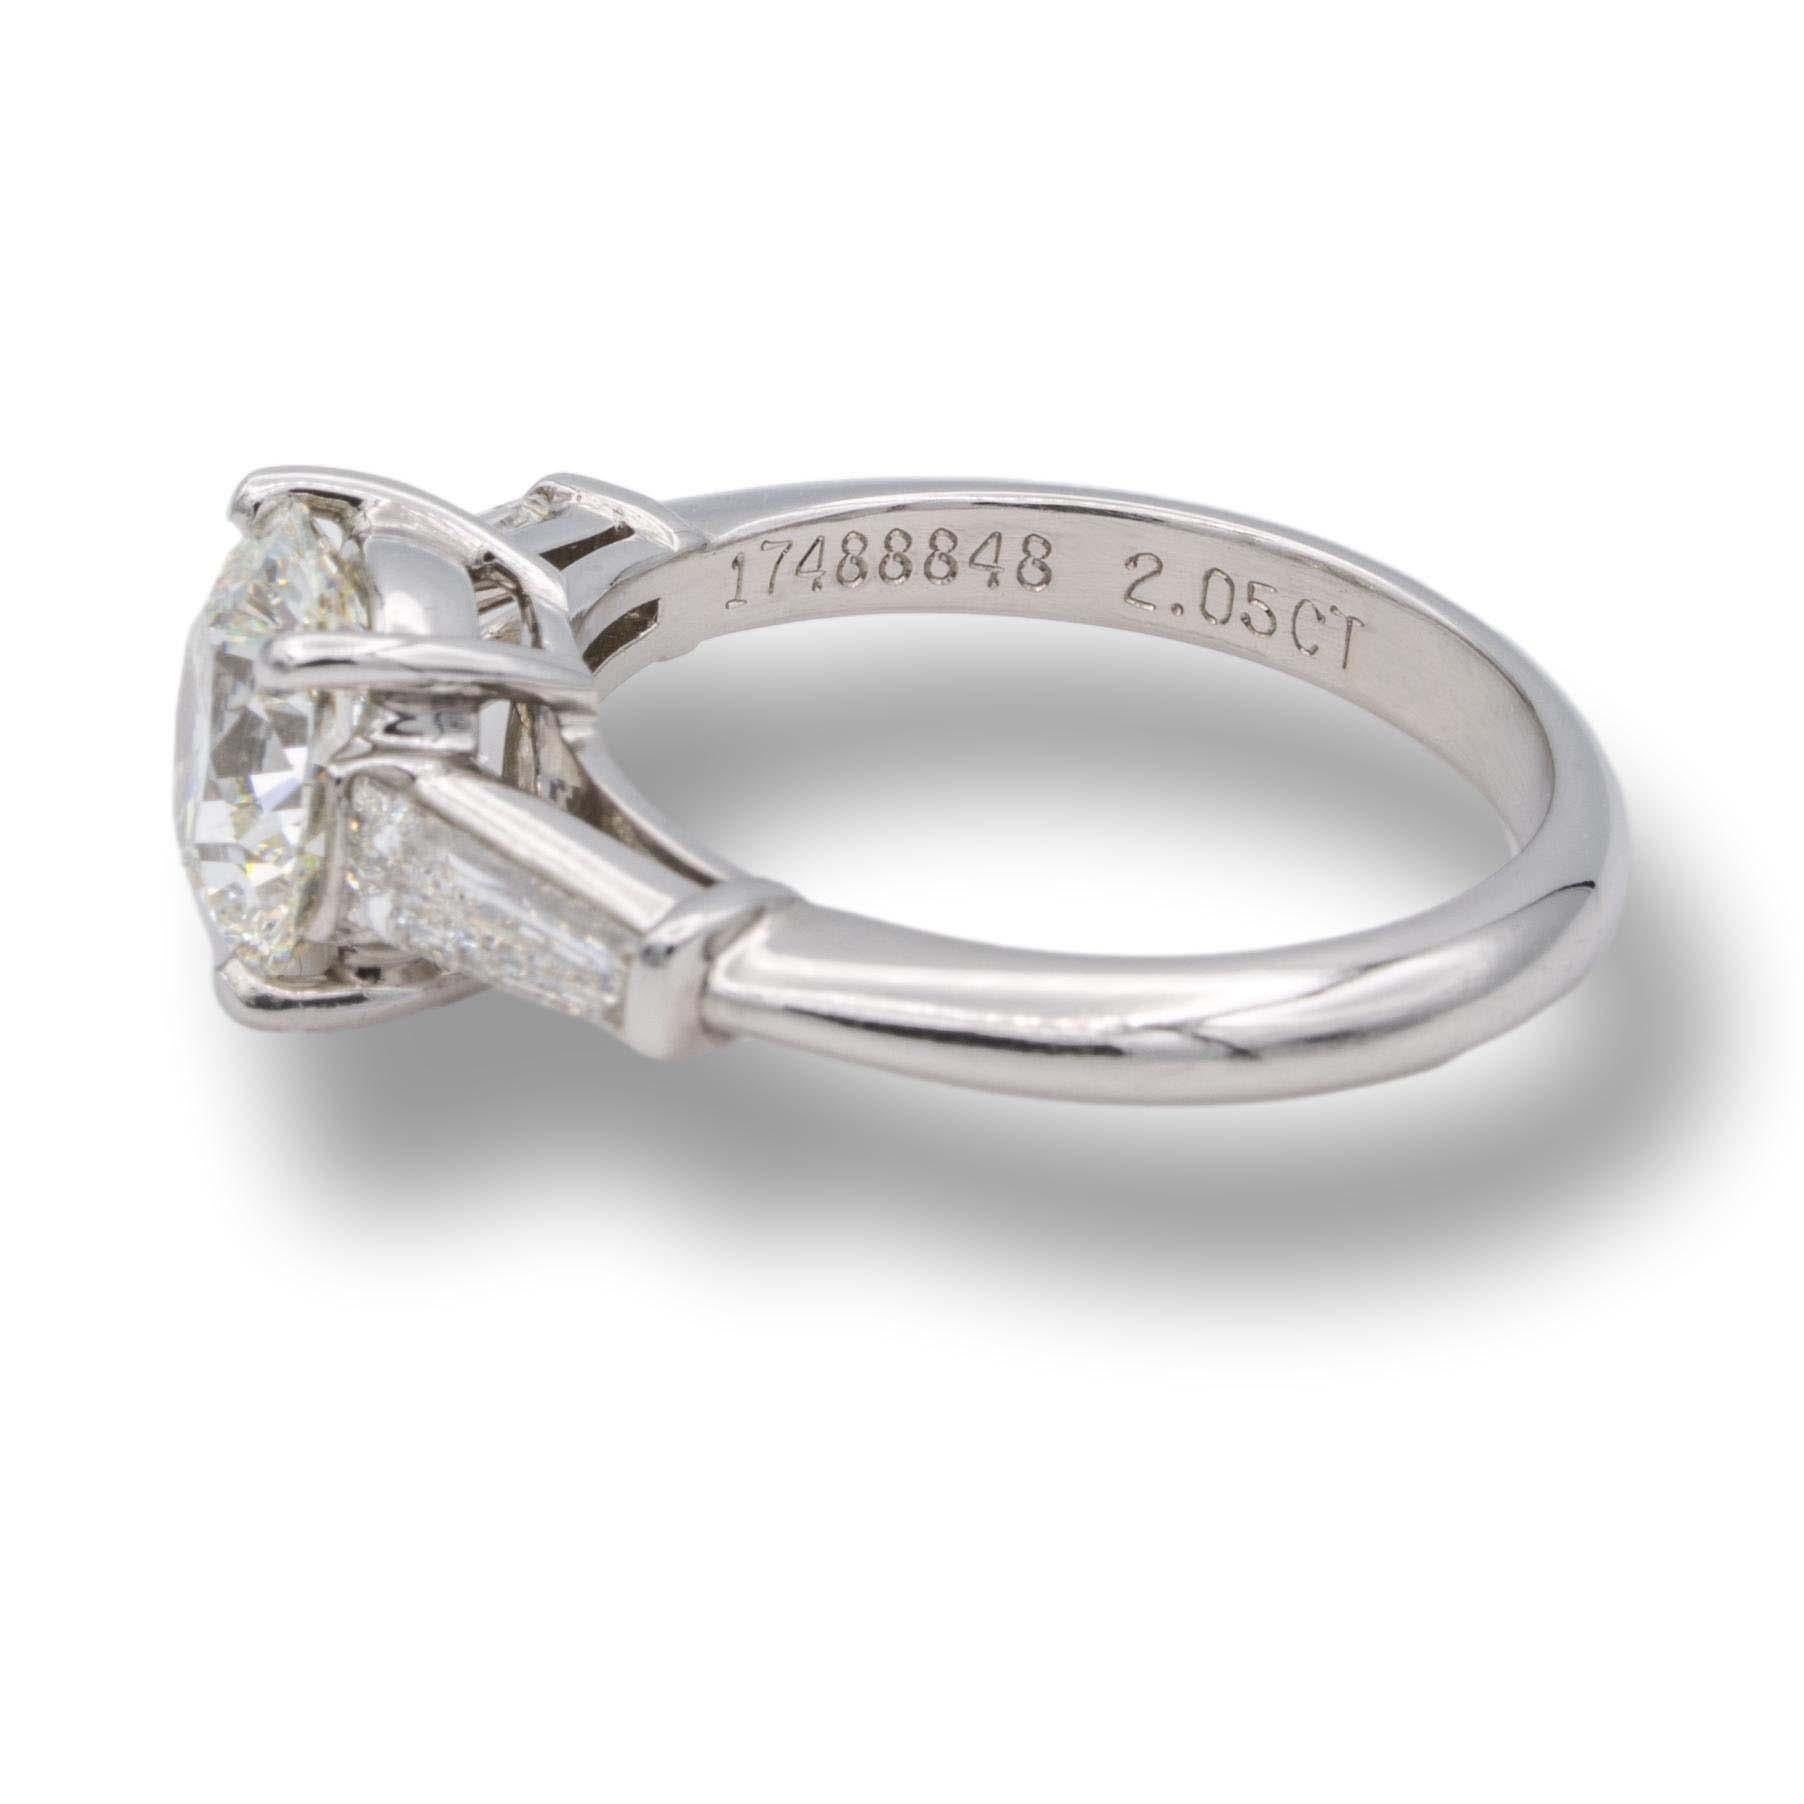 Tiffany & Co. Vintage diamond engagement ring finely crafted in platinum with a round brilliant cut center weighing 2.05 carats I color VVS1 clarity flanked by 2 tapered baguette diamond sides weighing 0.60 carats total weight I color VS clarity set